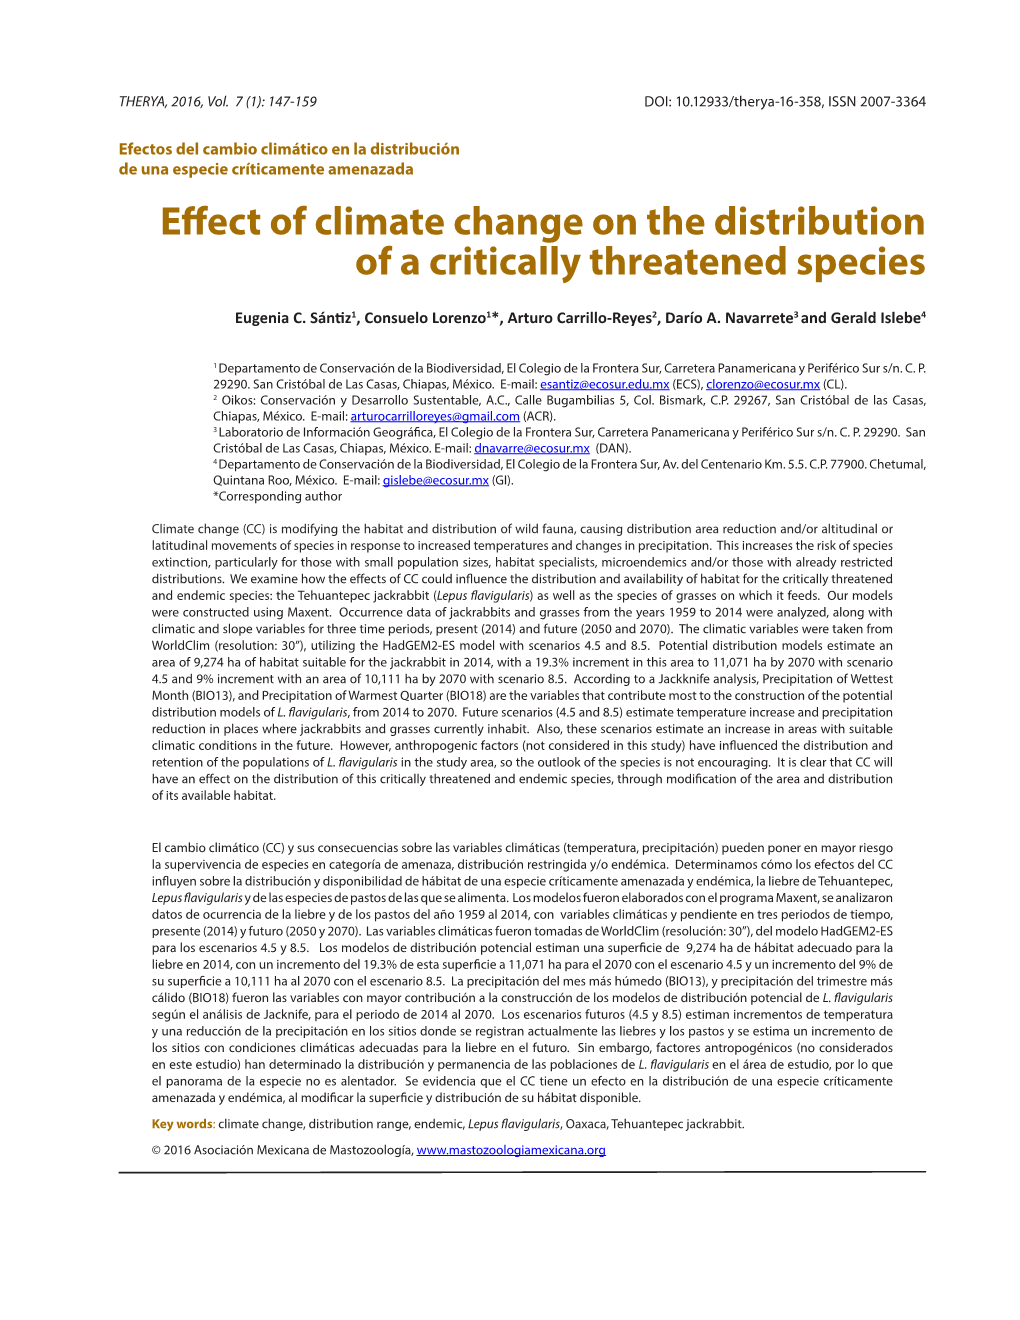 Effect of Climate Change on the Distribution of a Critically Threatened Species